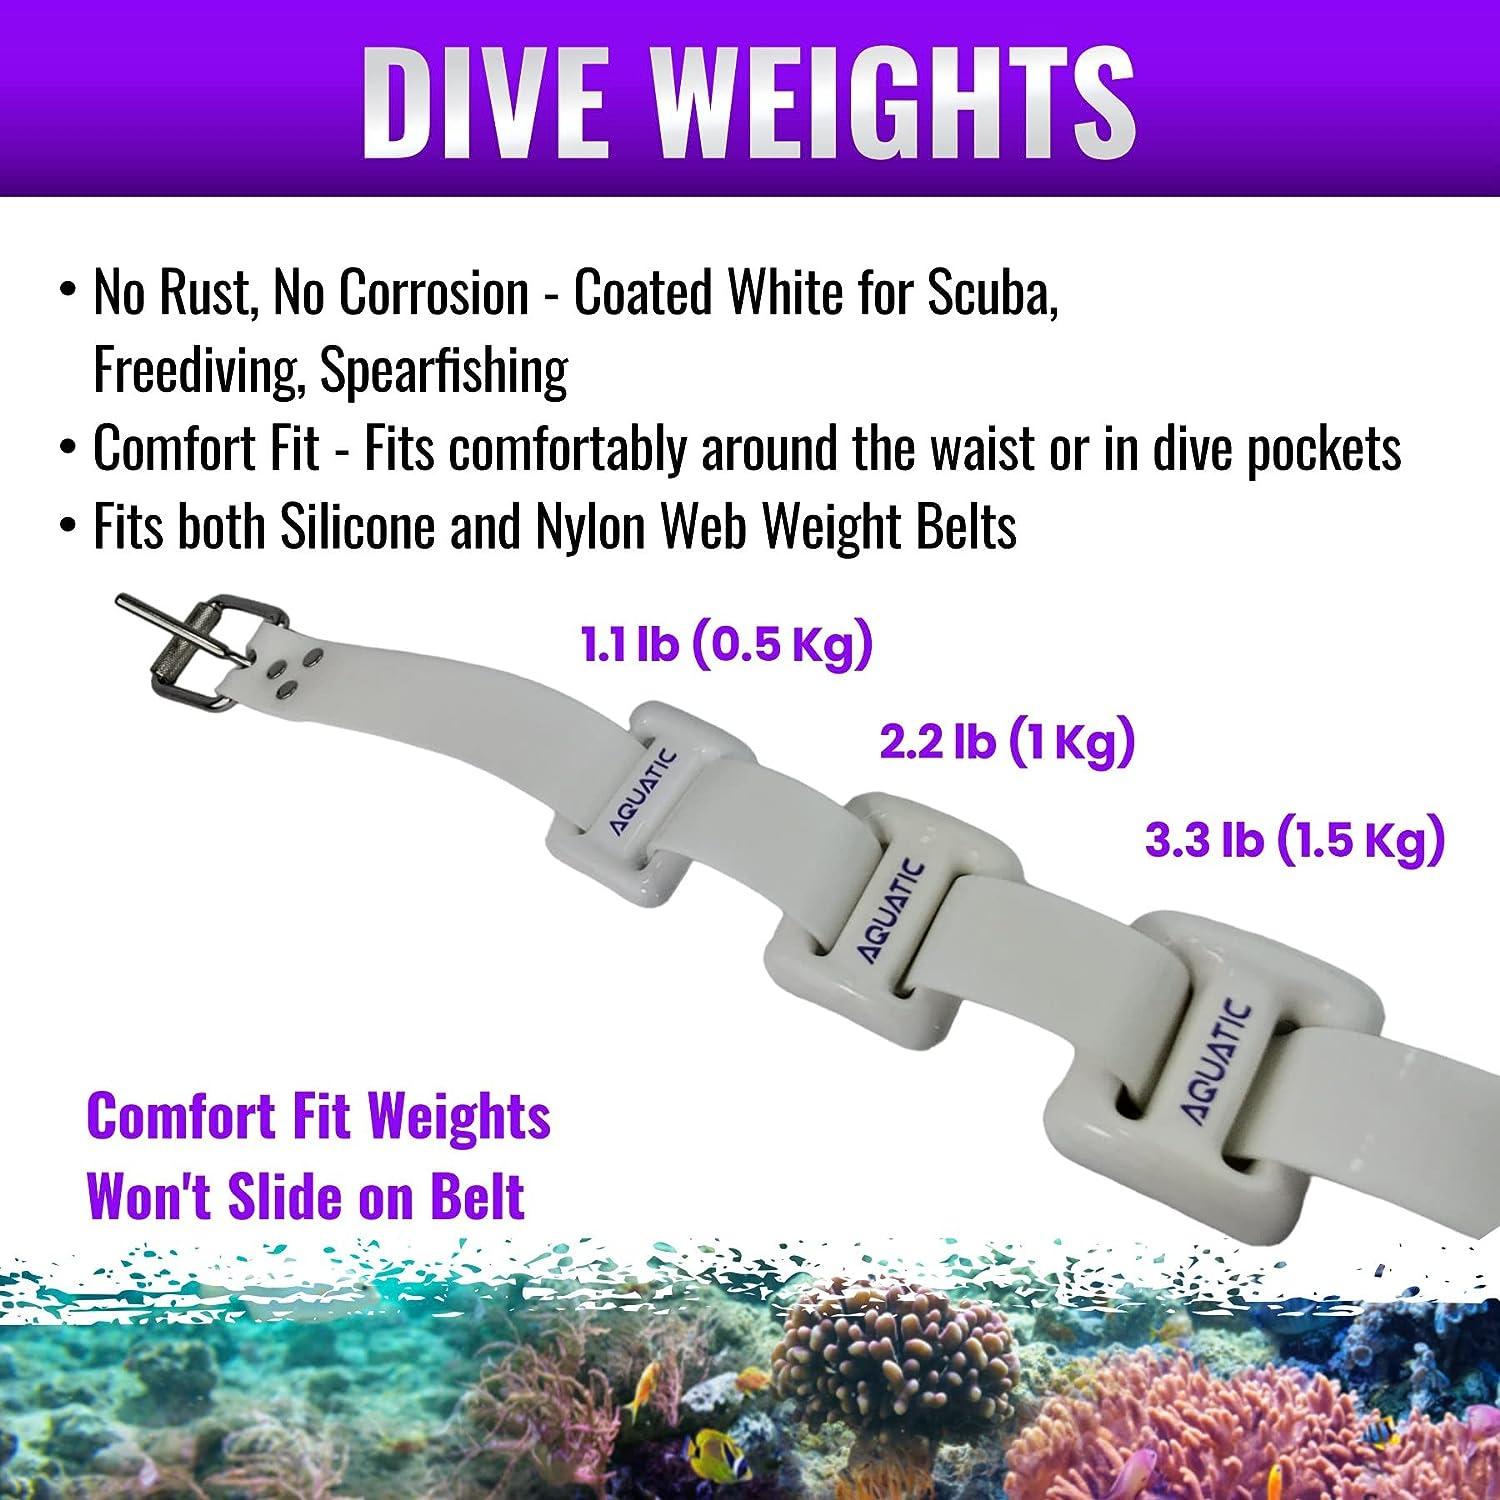 AQUATIC - Dive Weights - 1.1lb or 2.2lb or 3.3lb (0.5Kg or 1Kg or 1.5Kg) -  Coated White for Scuba, Freediving, Spearfishing 2.2lb (1Kg)